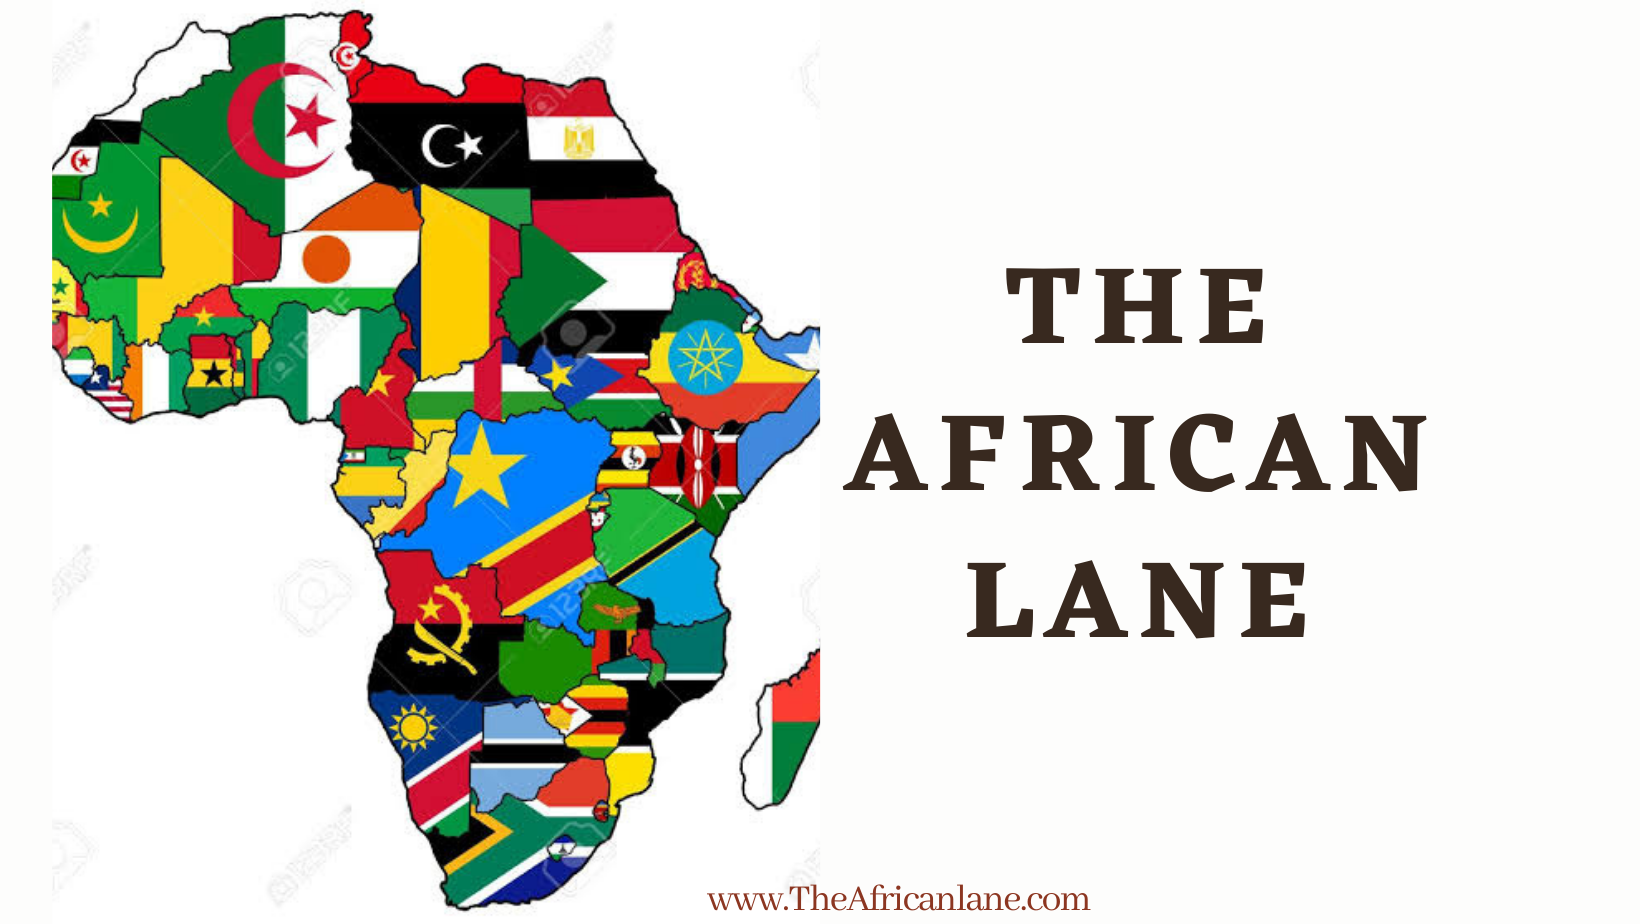 The African Lane